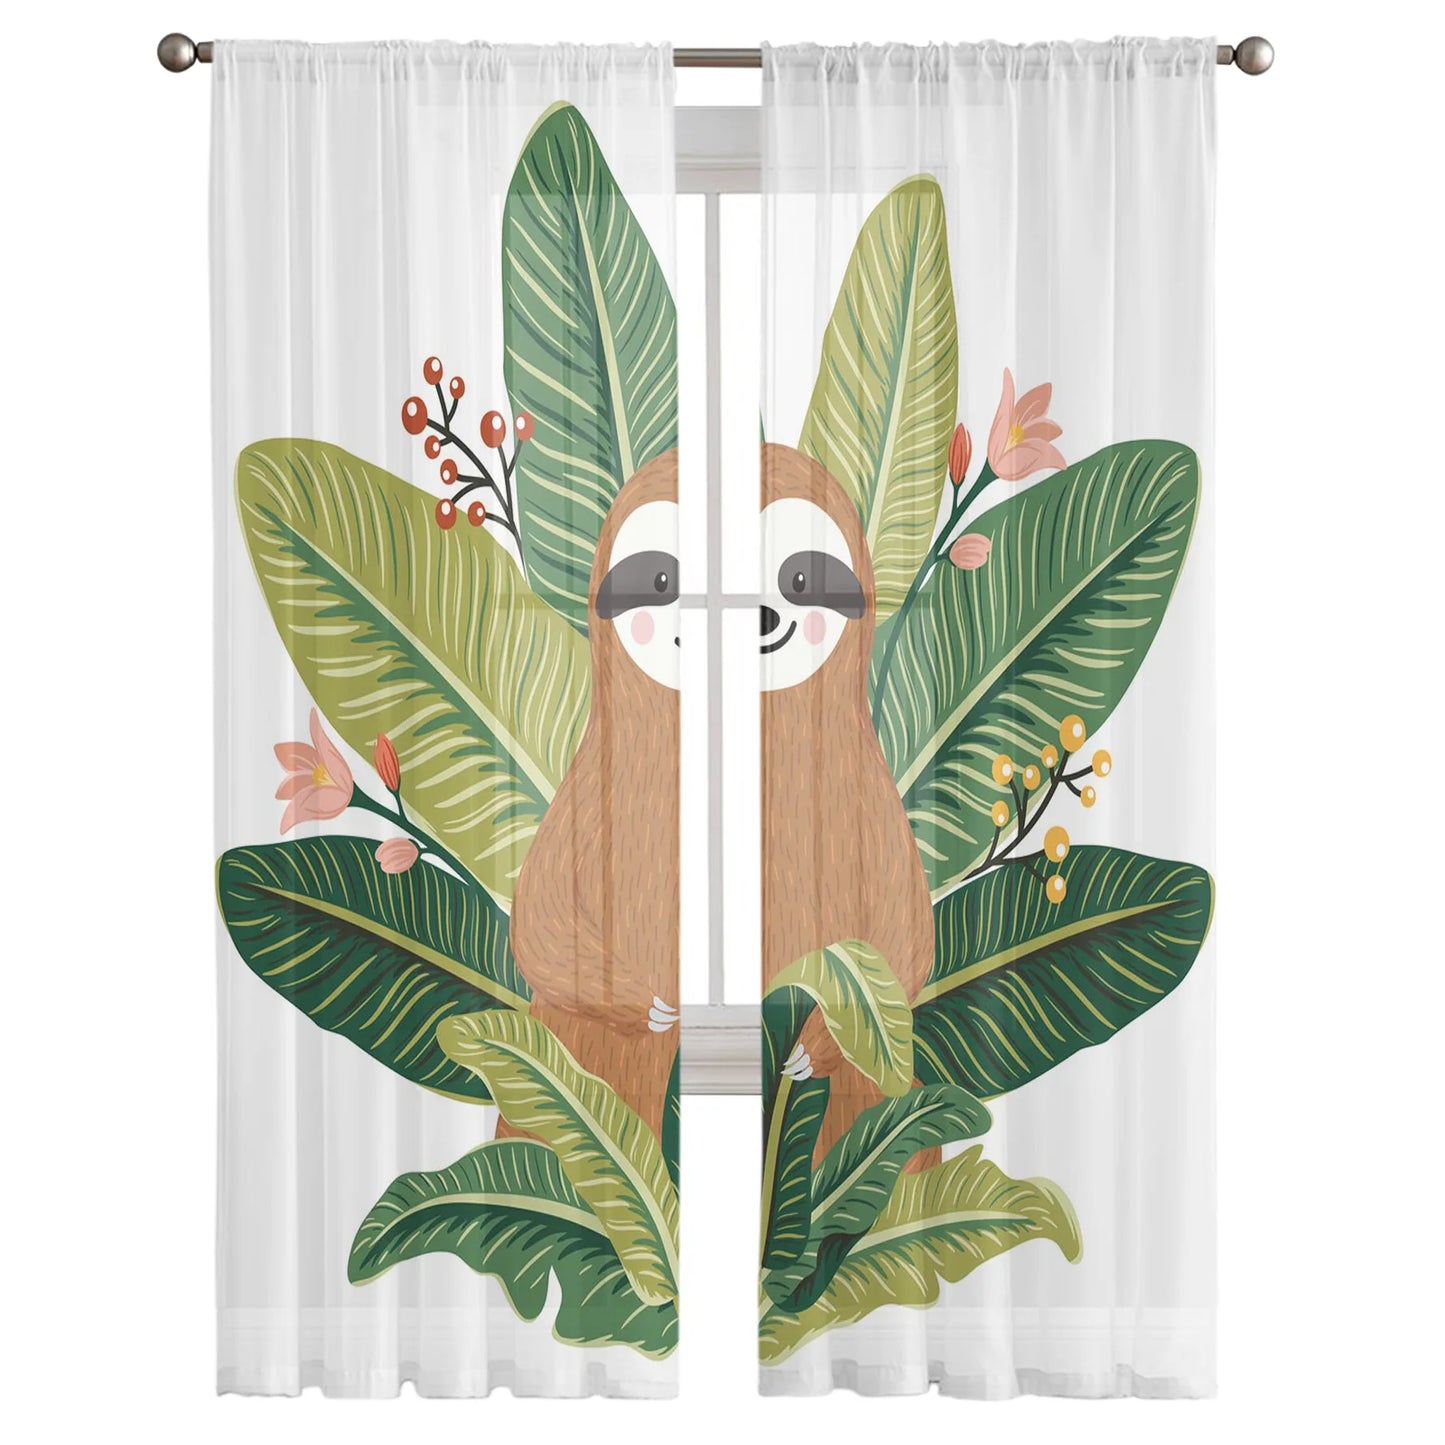 Queen of Sloths Curtain